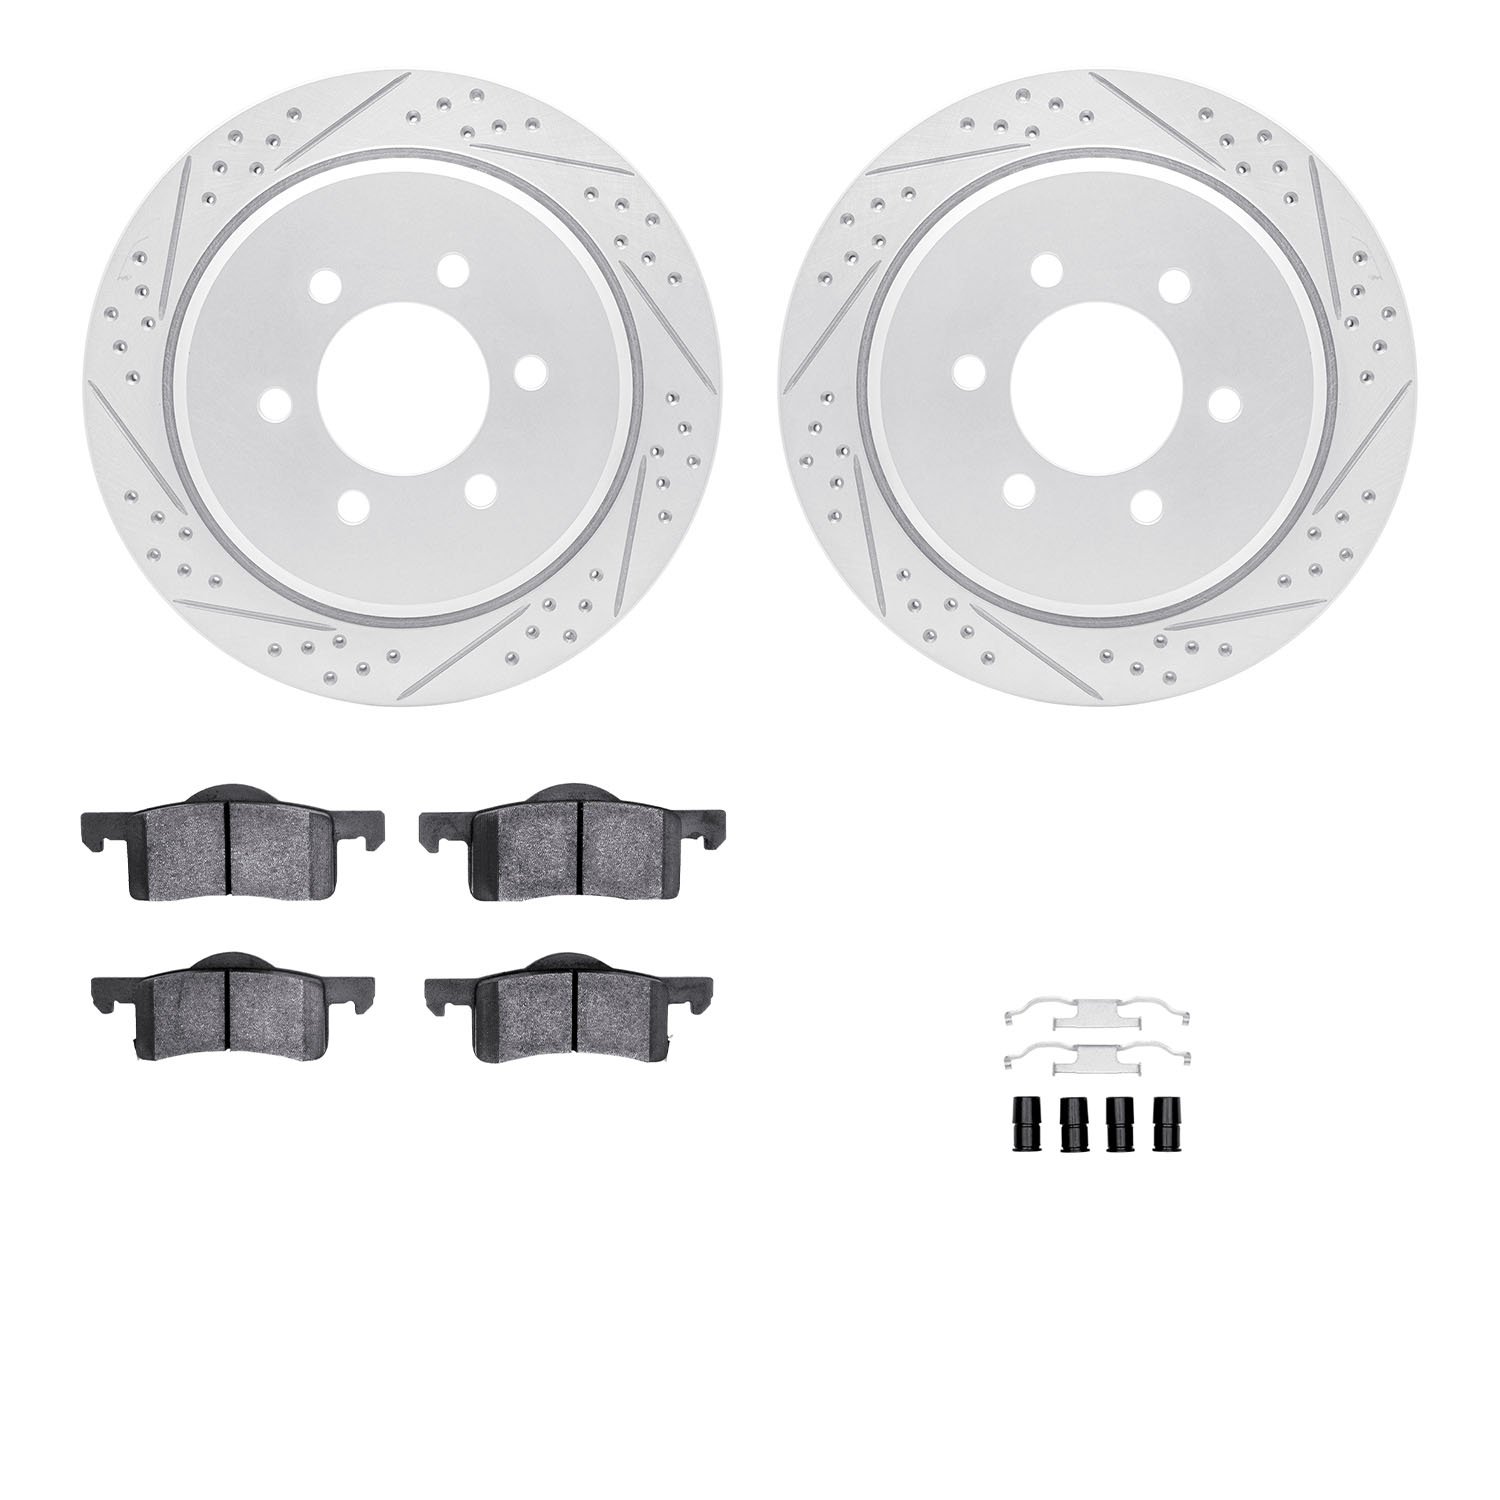 2212-99133 Geoperformance Drilled/Slotted Rotors w/Heavy-Duty Pads Kit & Hardware, 2002-2006 Ford/Lincoln/Mercury/Mazda, Positio